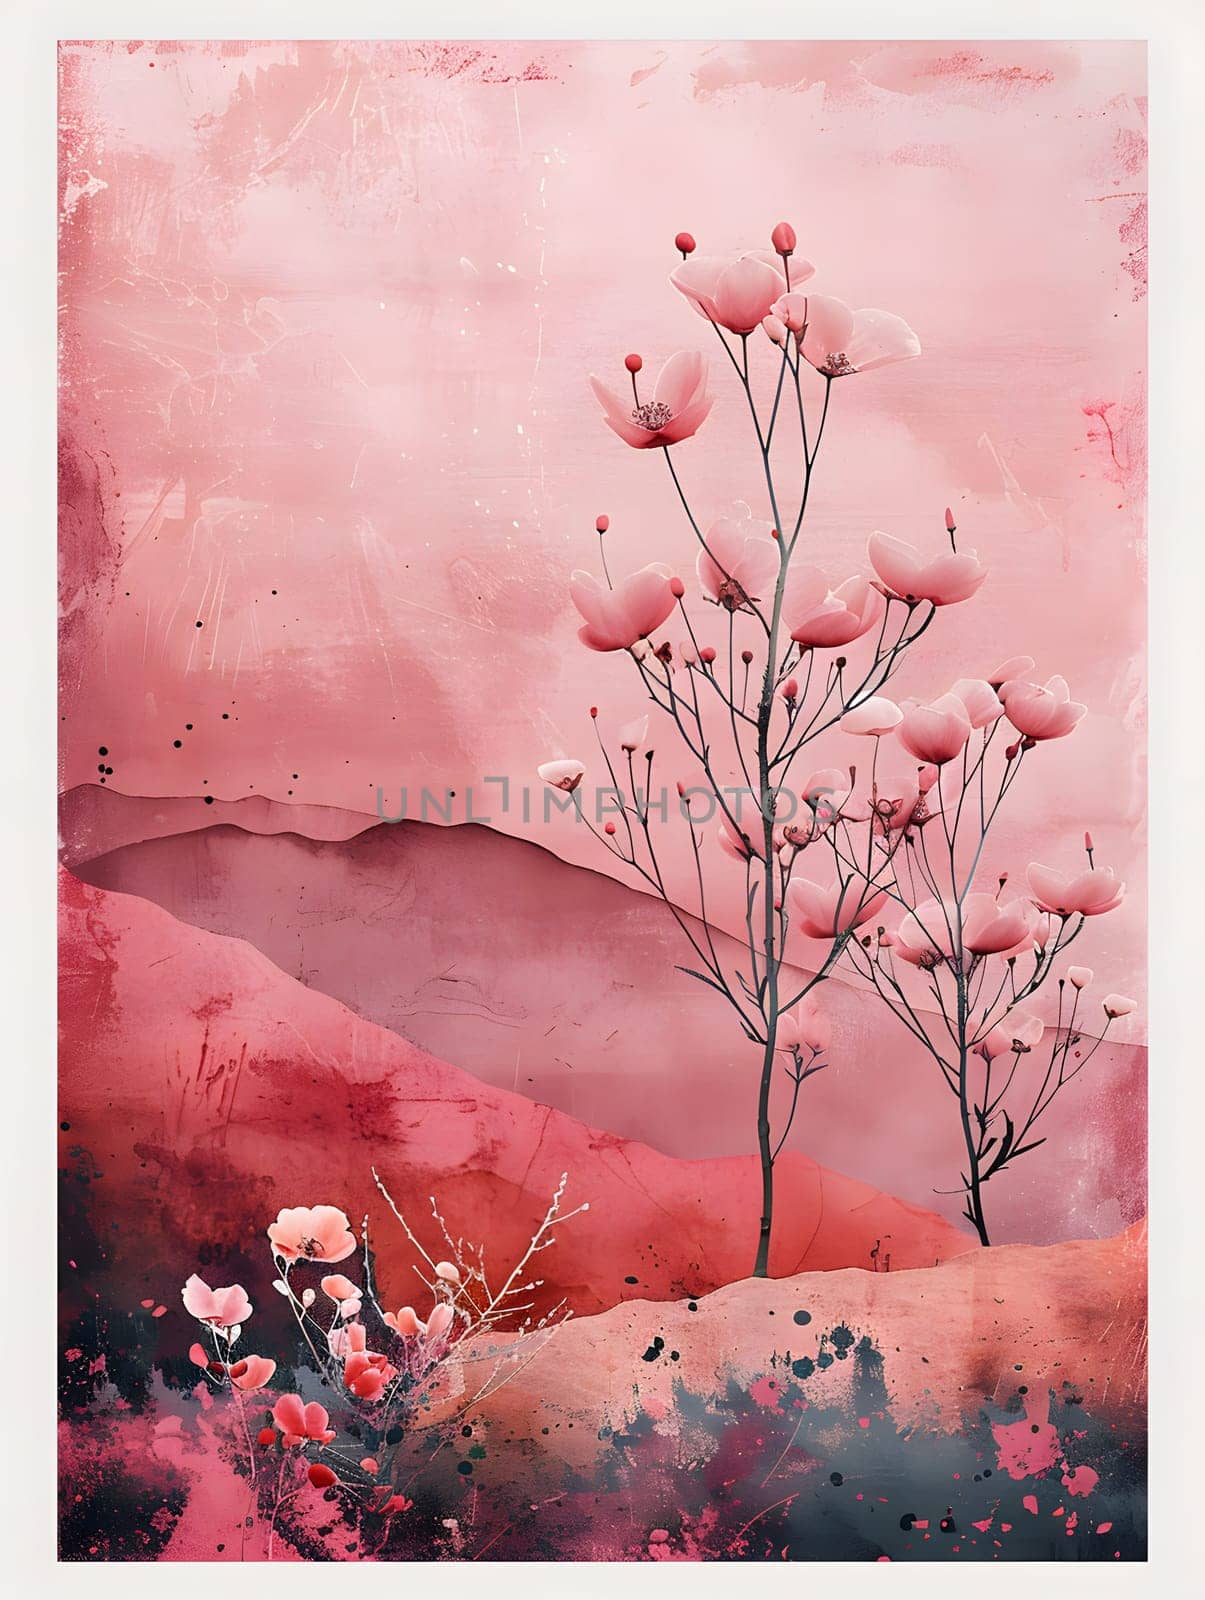 Artistic painting of a pink flowered tree on a matching background by Nadtochiy